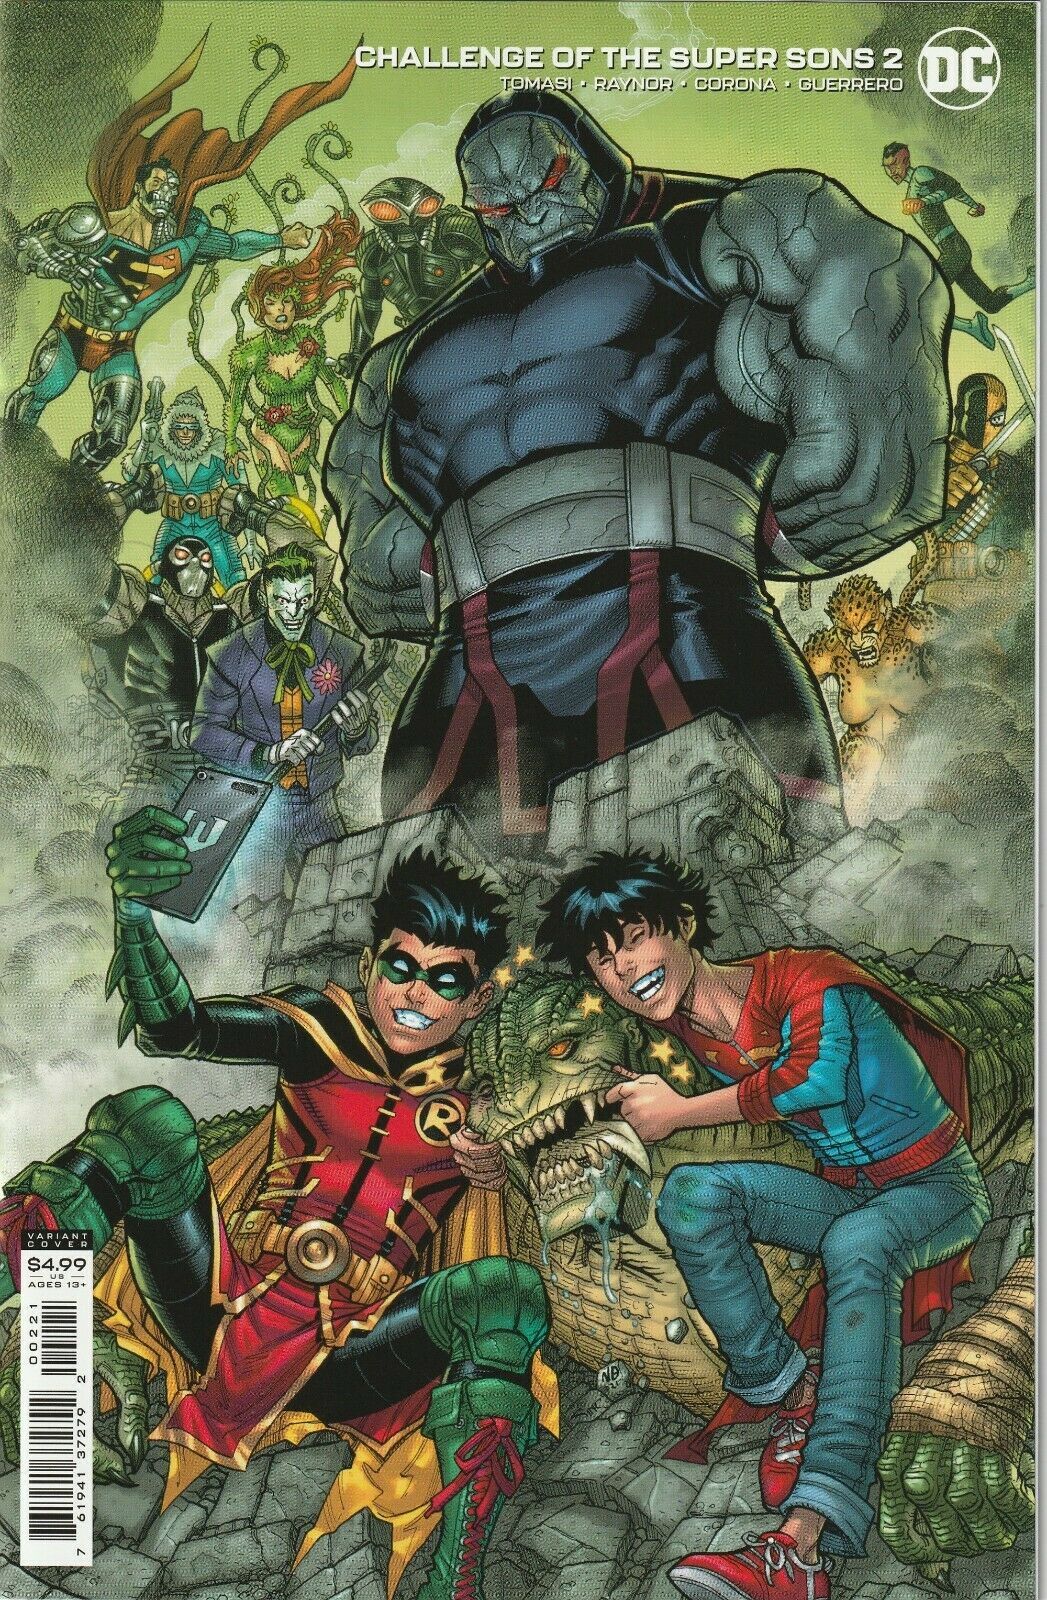 Super Sons # 8 Variant Cover NM DC 